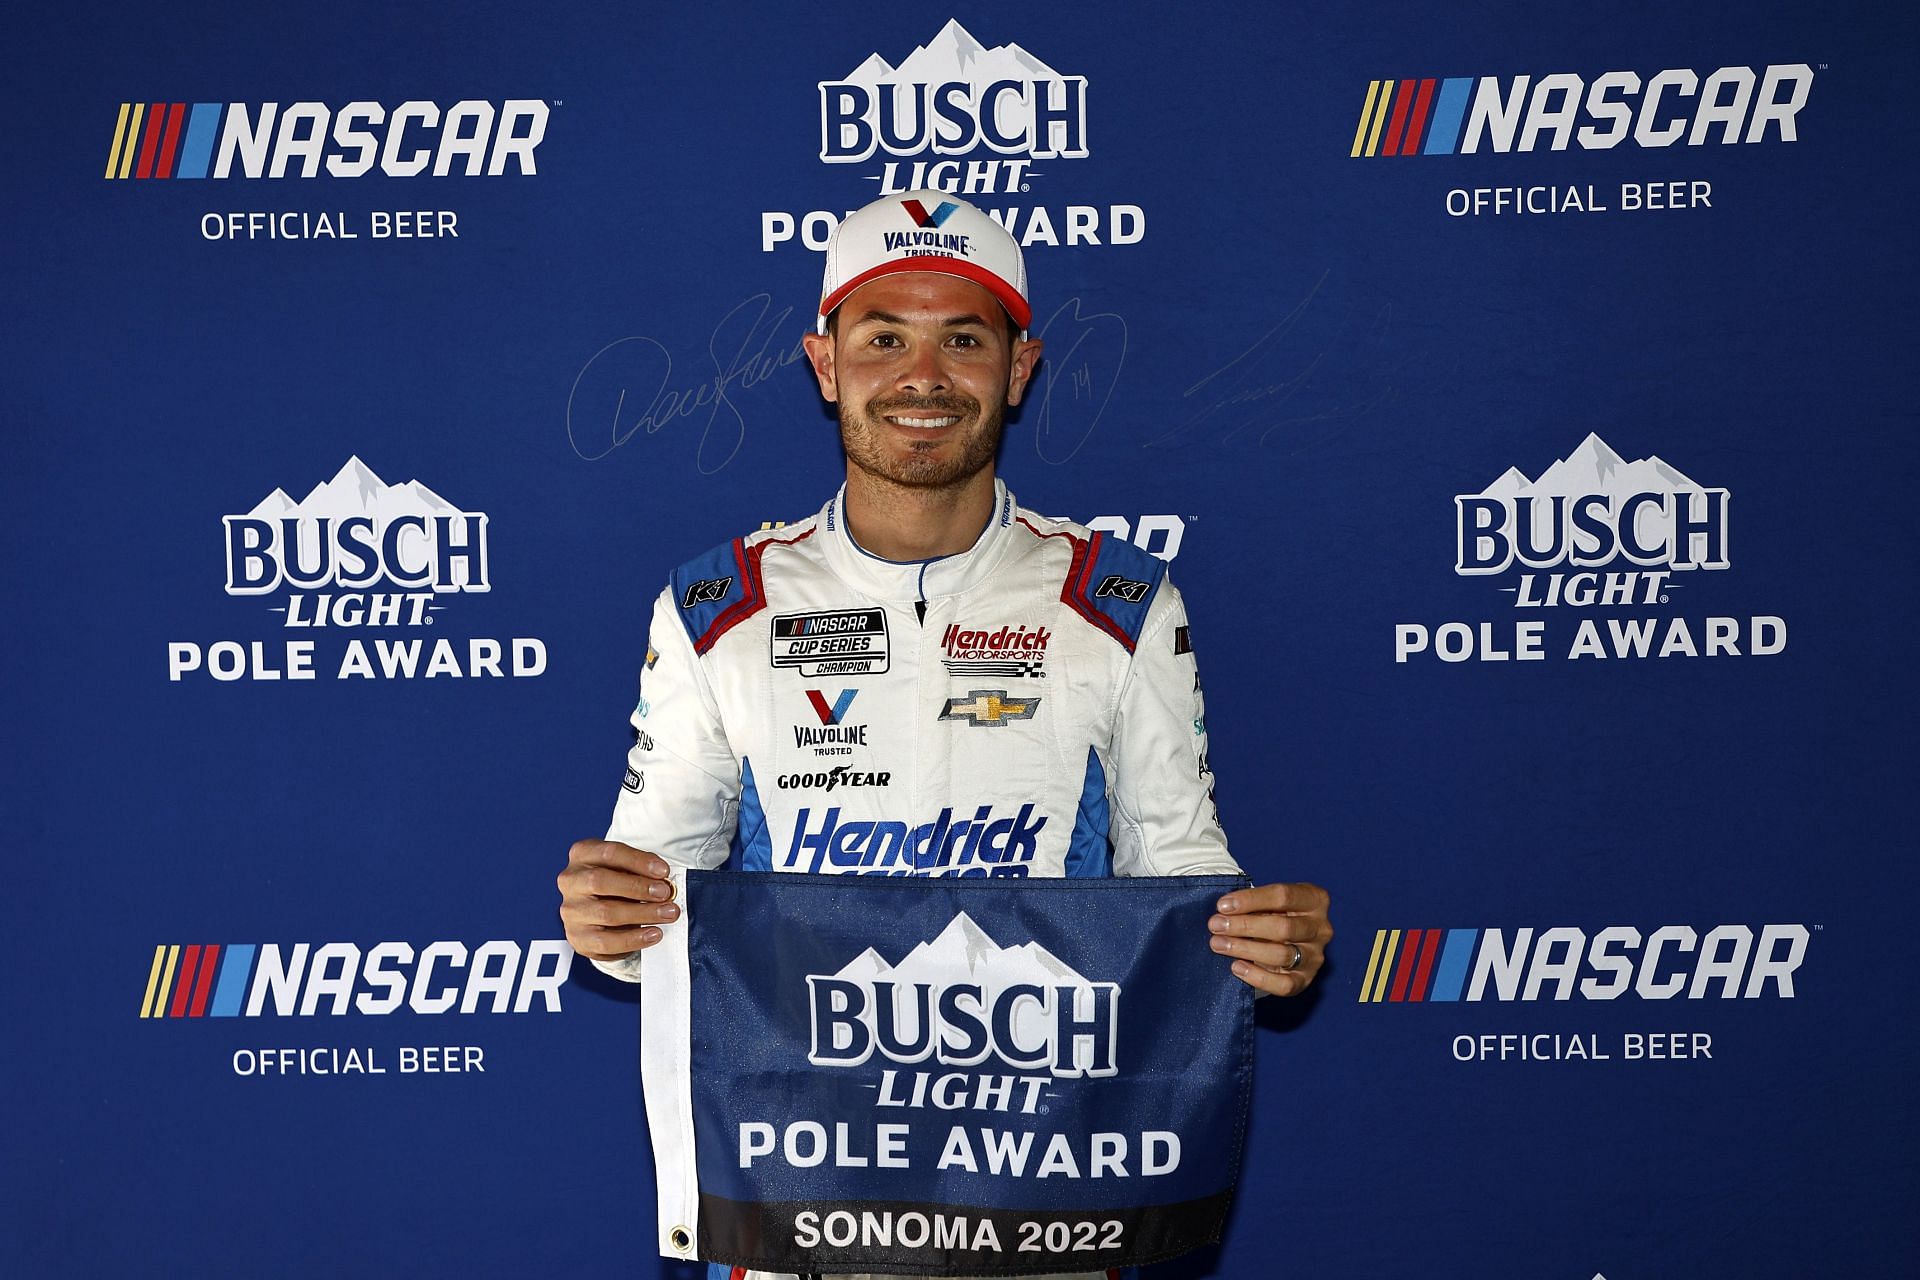 Larson poses for photos after winning the pole award during qualifying for the NASCAR Cup Series Toyota/Save Mart 350 at Sonoma Raceway